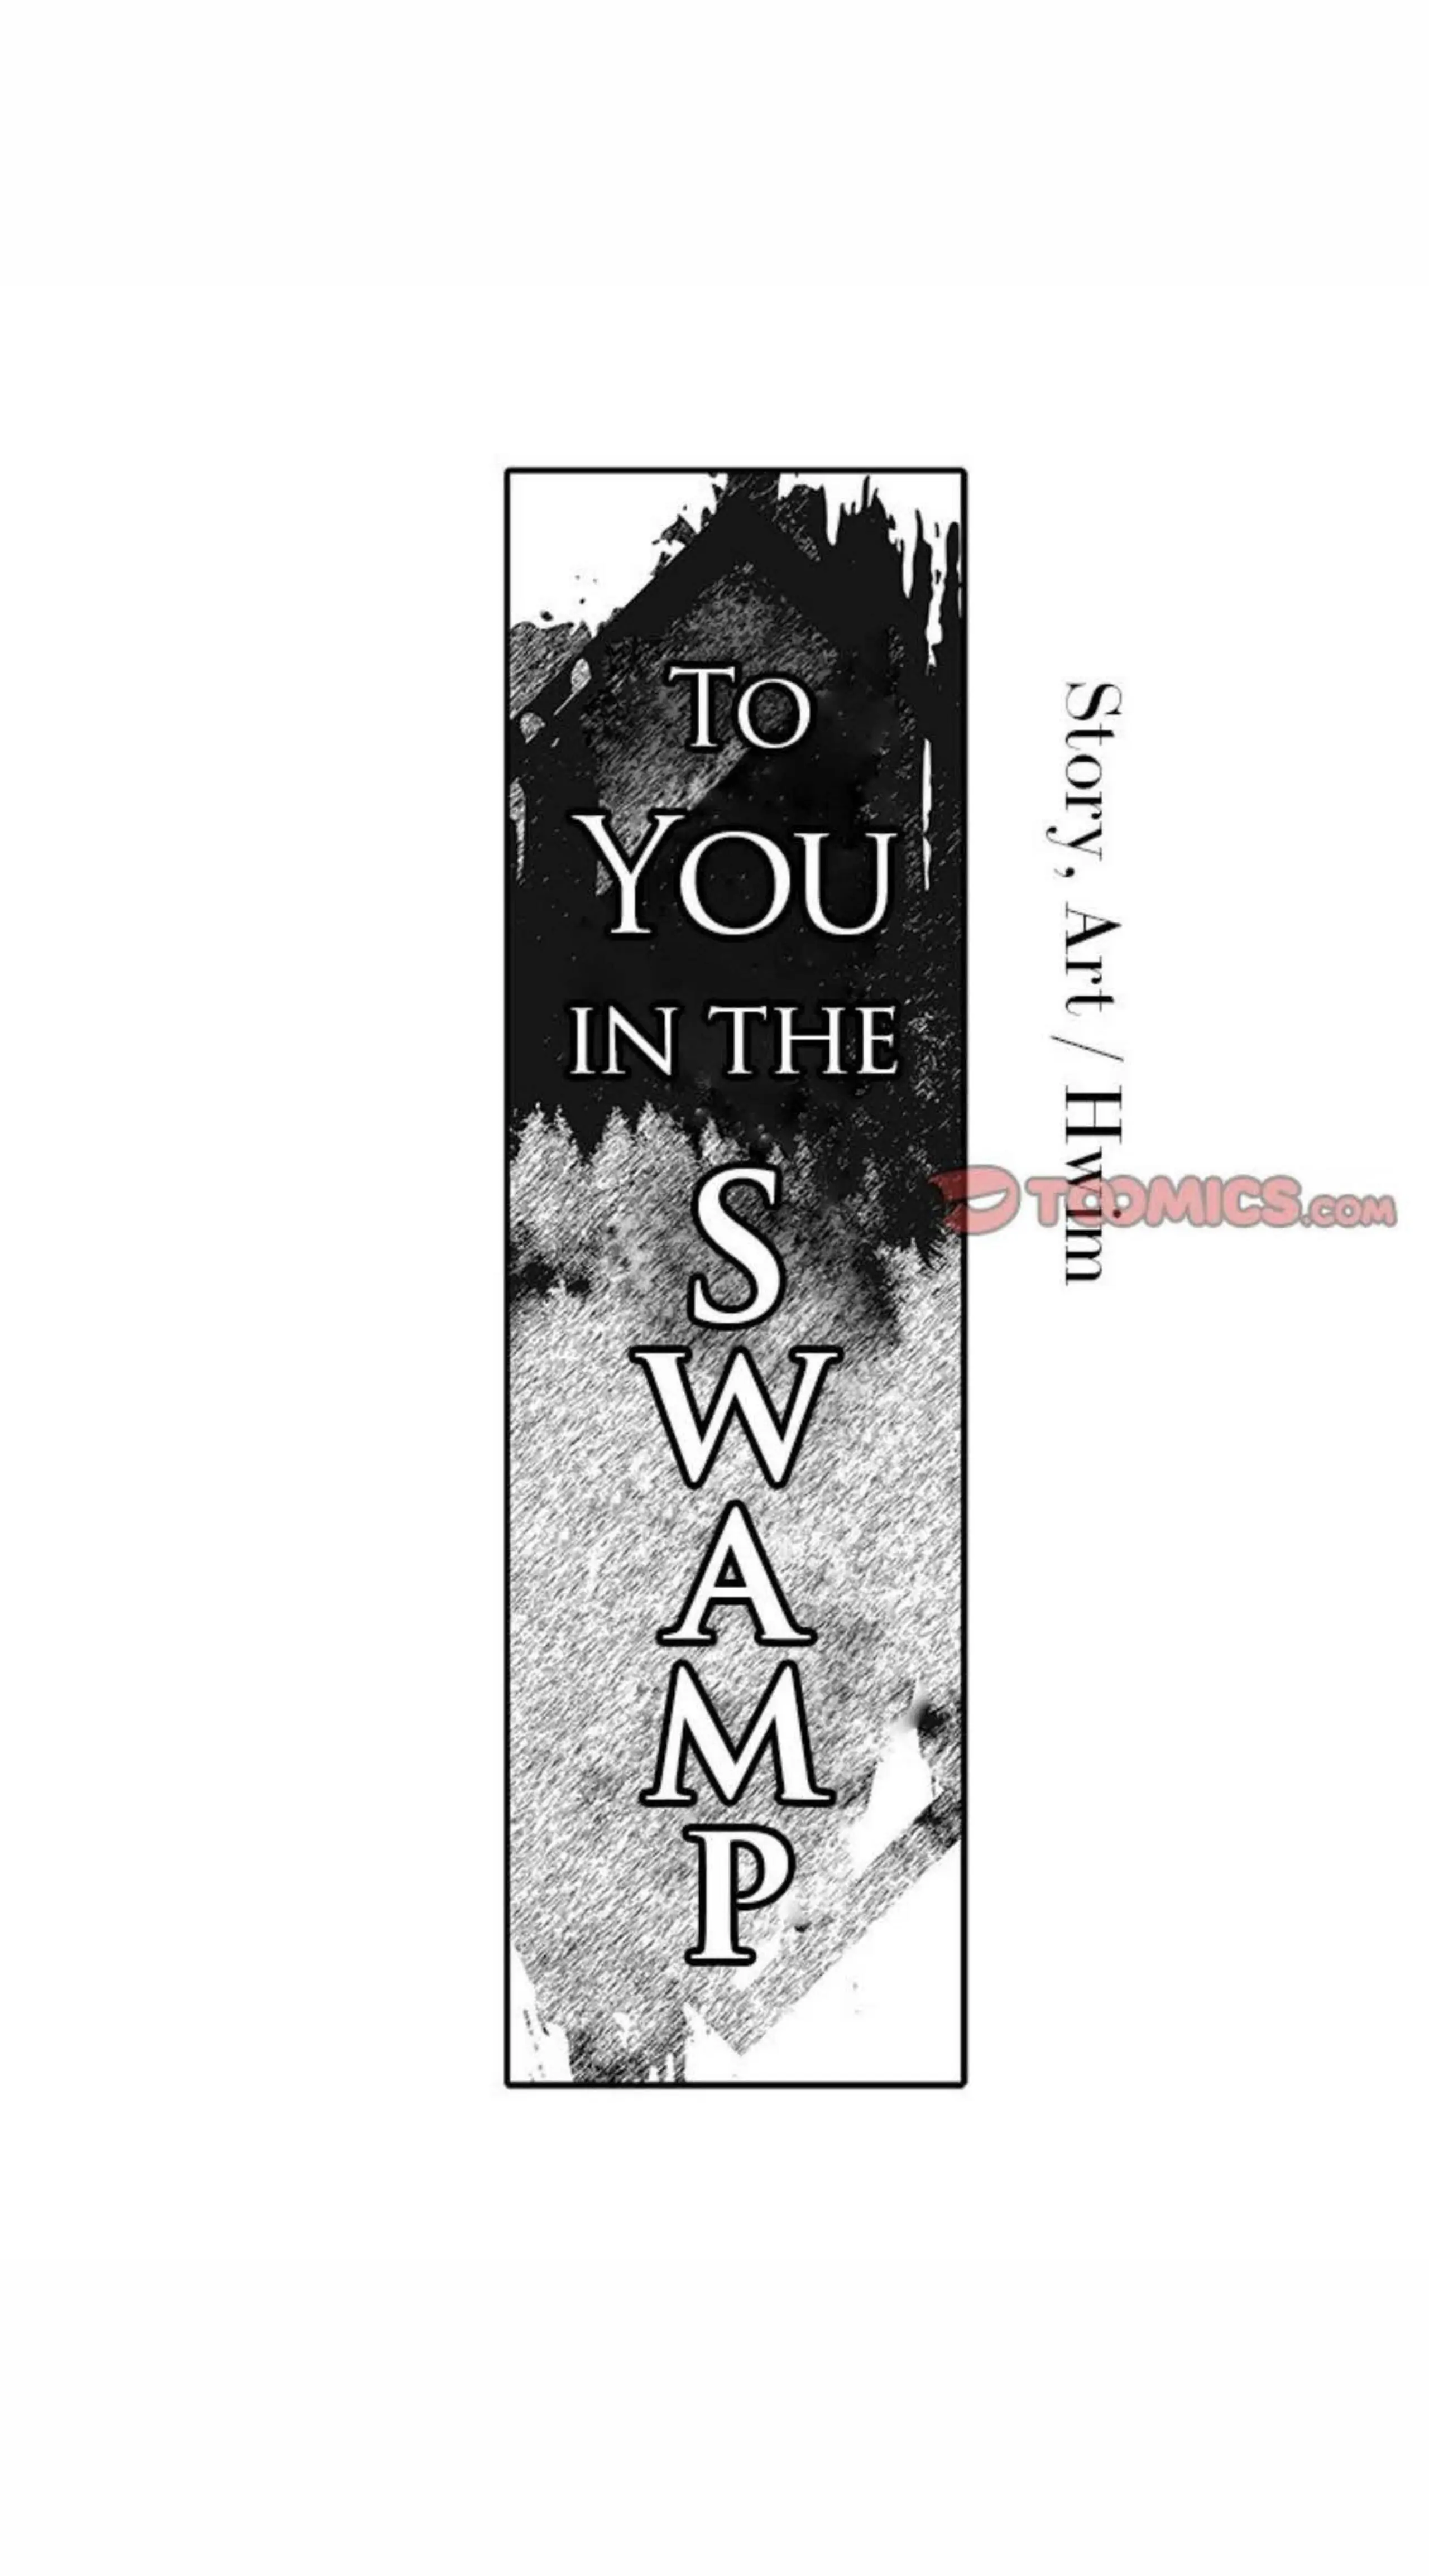 Read To You In The Swamp Manga English Online [Latest Chapters] Online Free  - YaoiScan